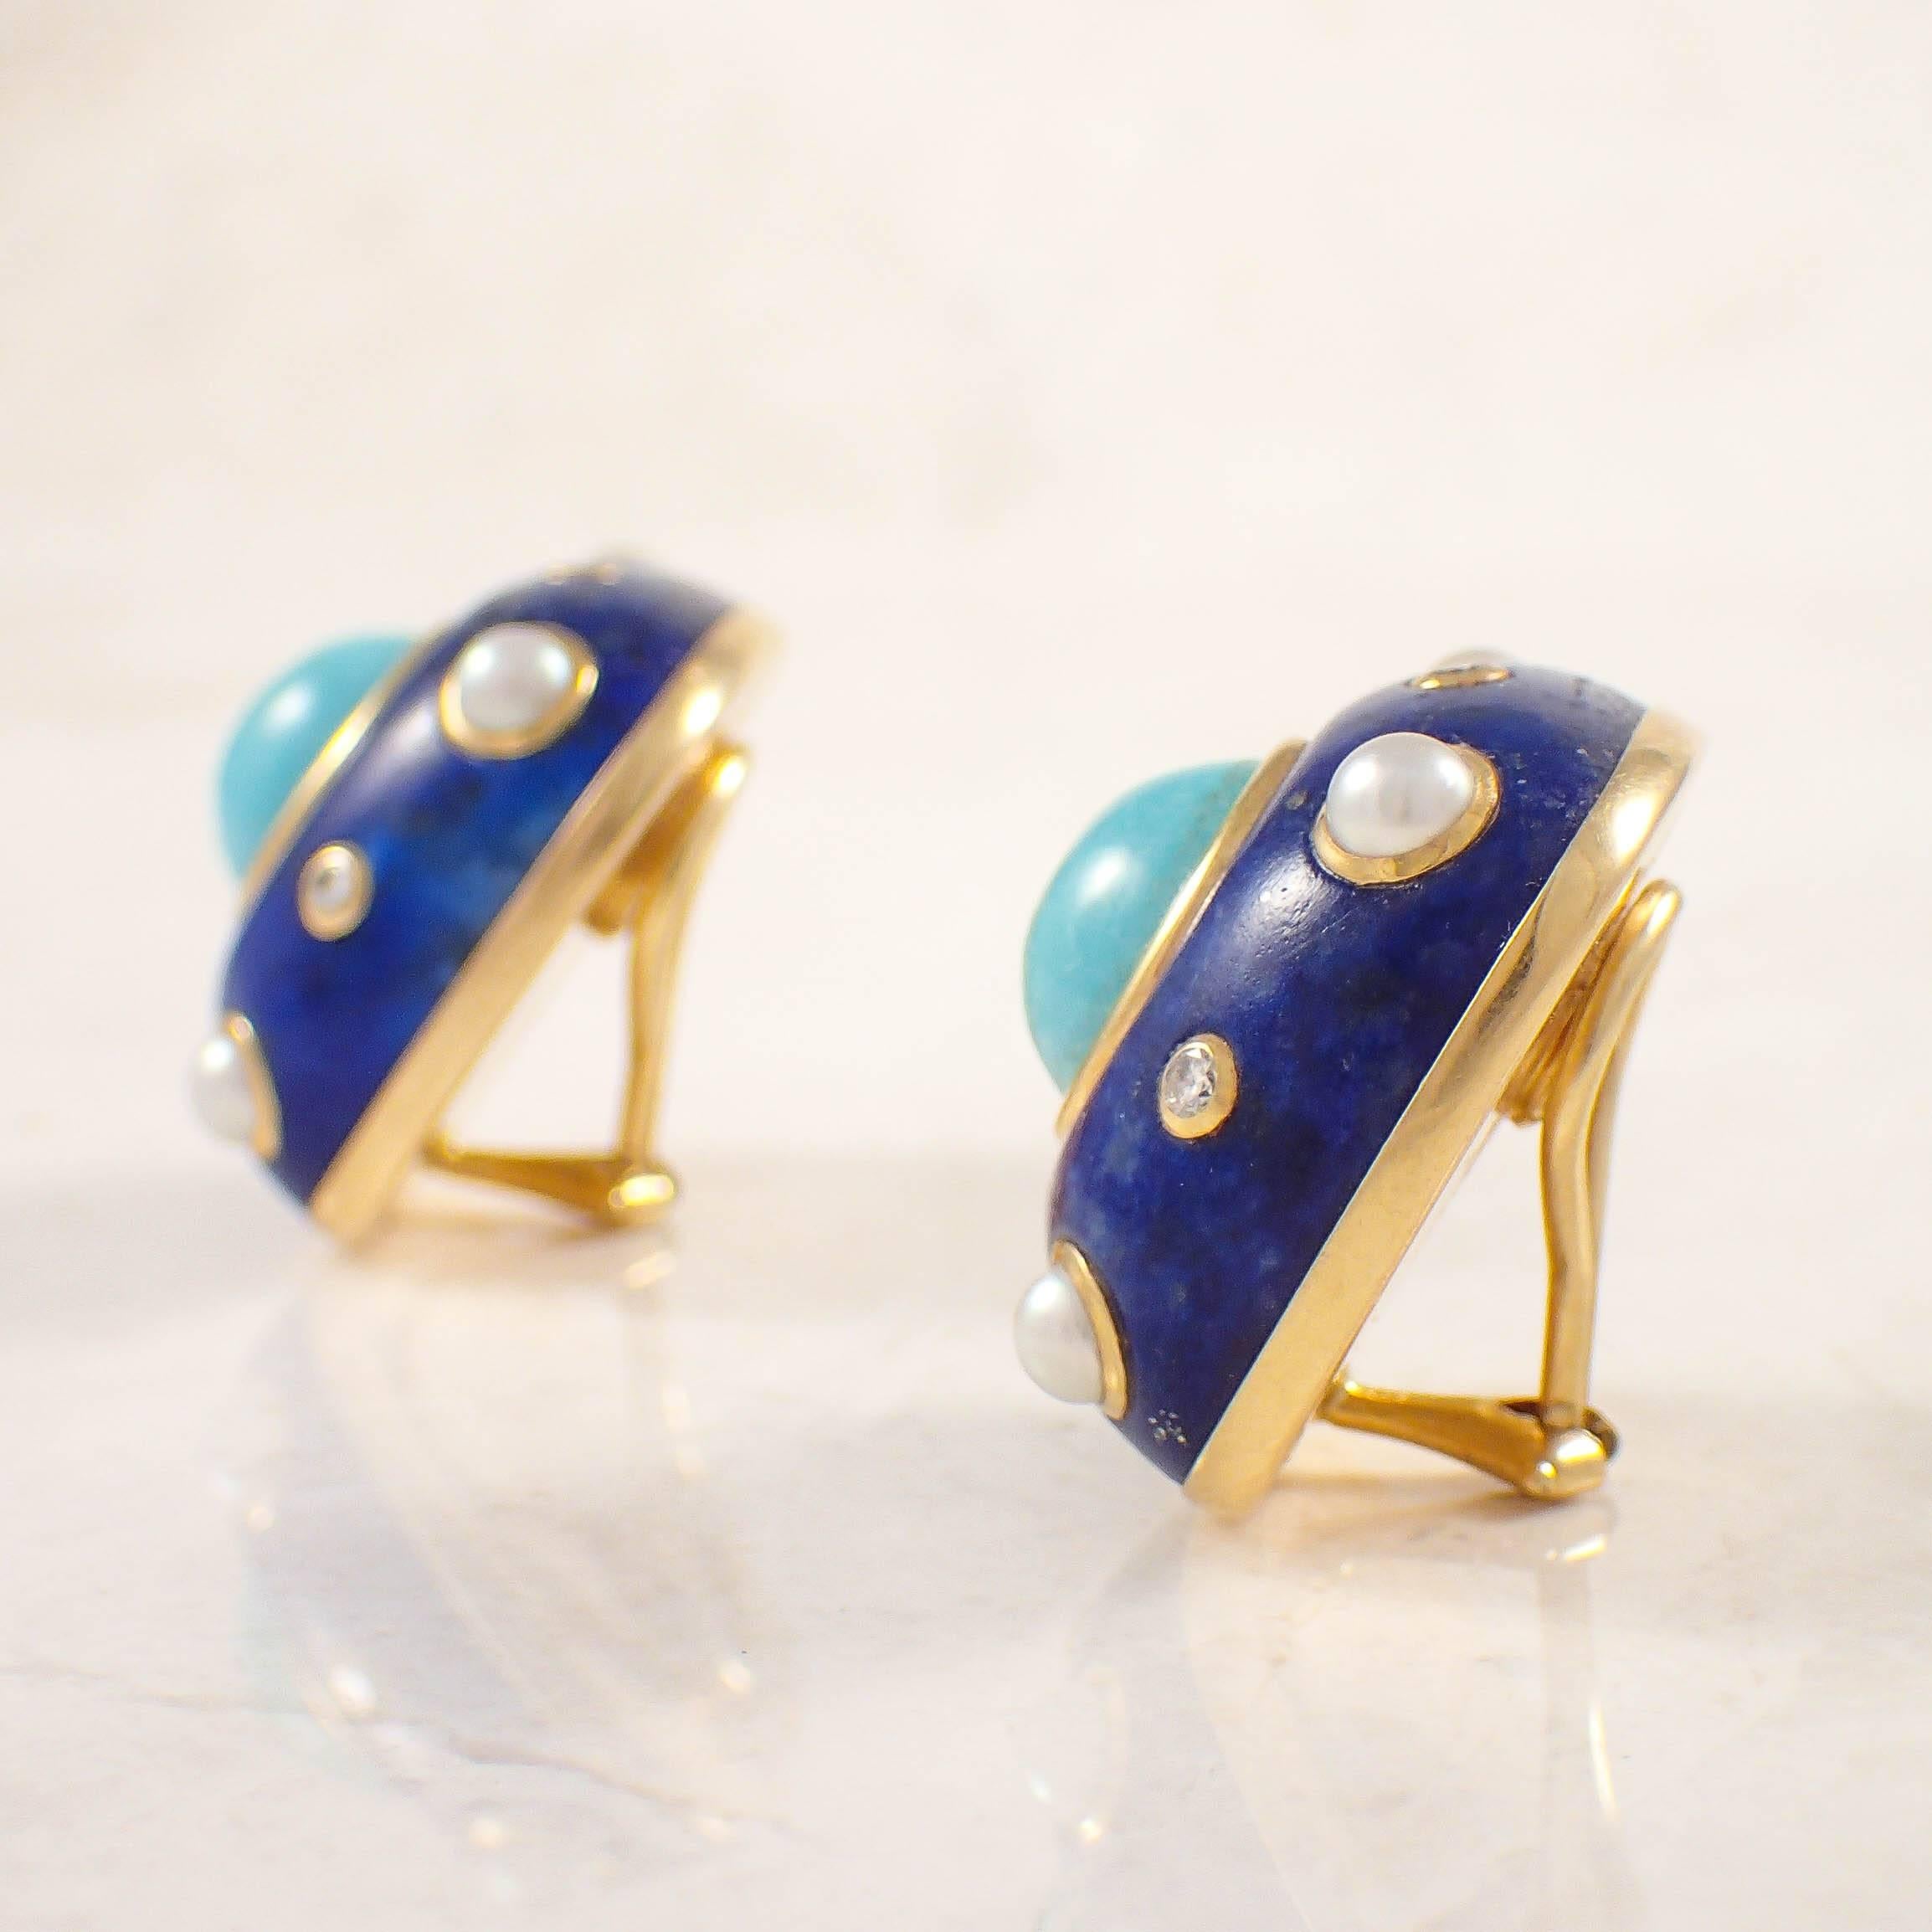 18K Yellow gold Trianon lapiz, turquoise, pearl and diamond earrings. The cushion cut lapiz base measures 24.7 X 24.7 mm, and is set in the center with one round turquoise measuring 11 mm. The earrings are decorated with 8 half seed pearls measuring